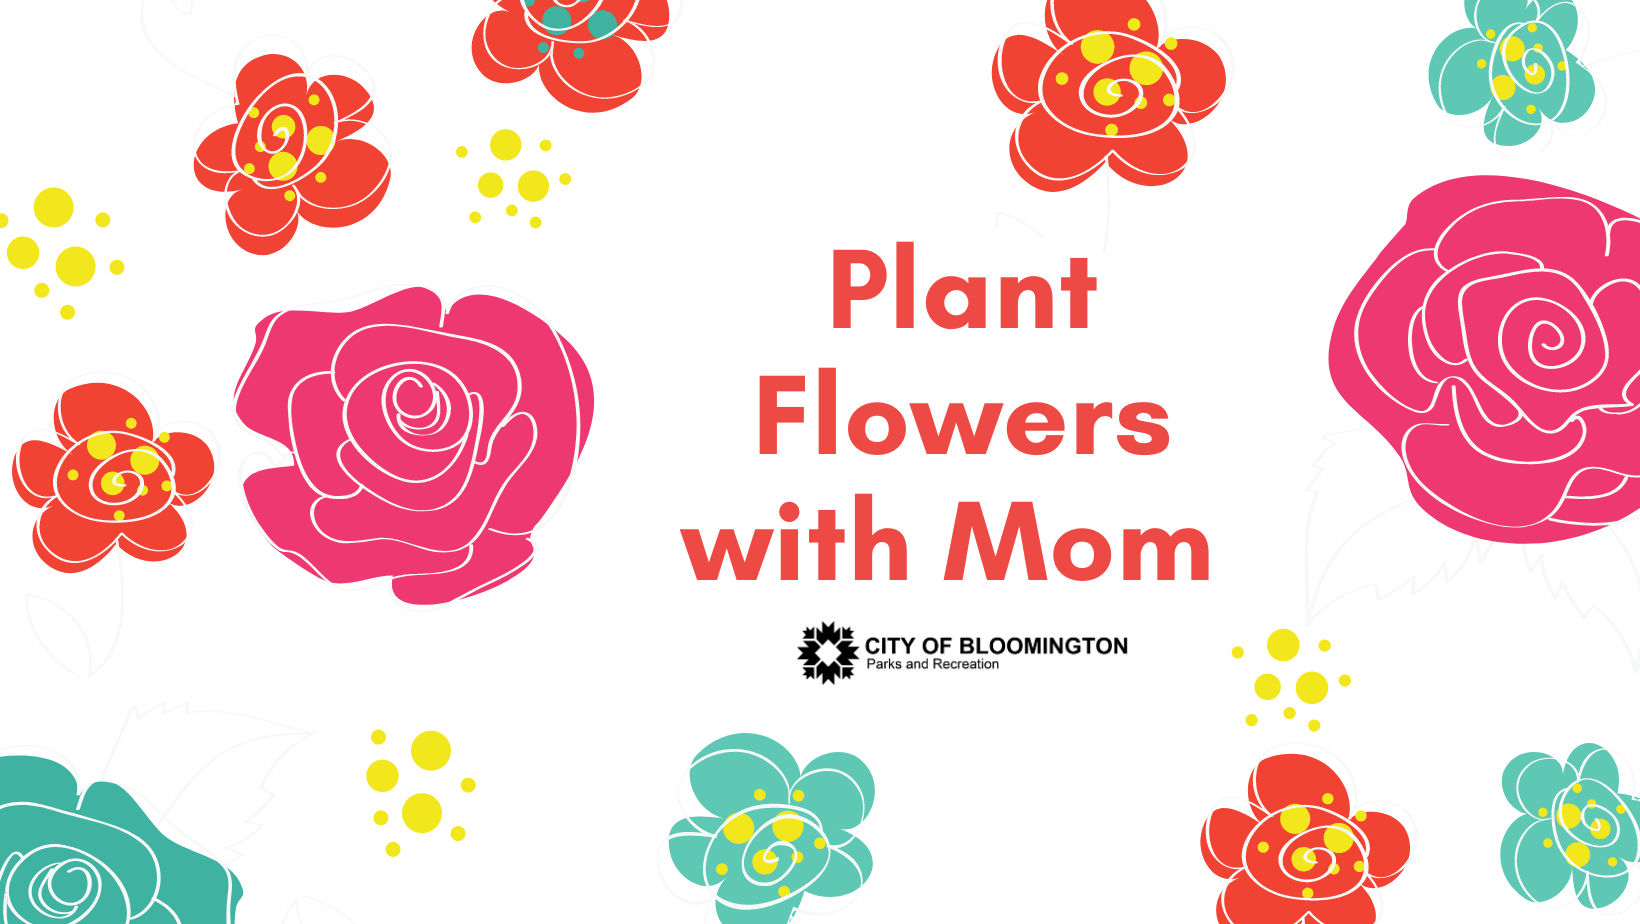 Plant Flowers with Mom banner